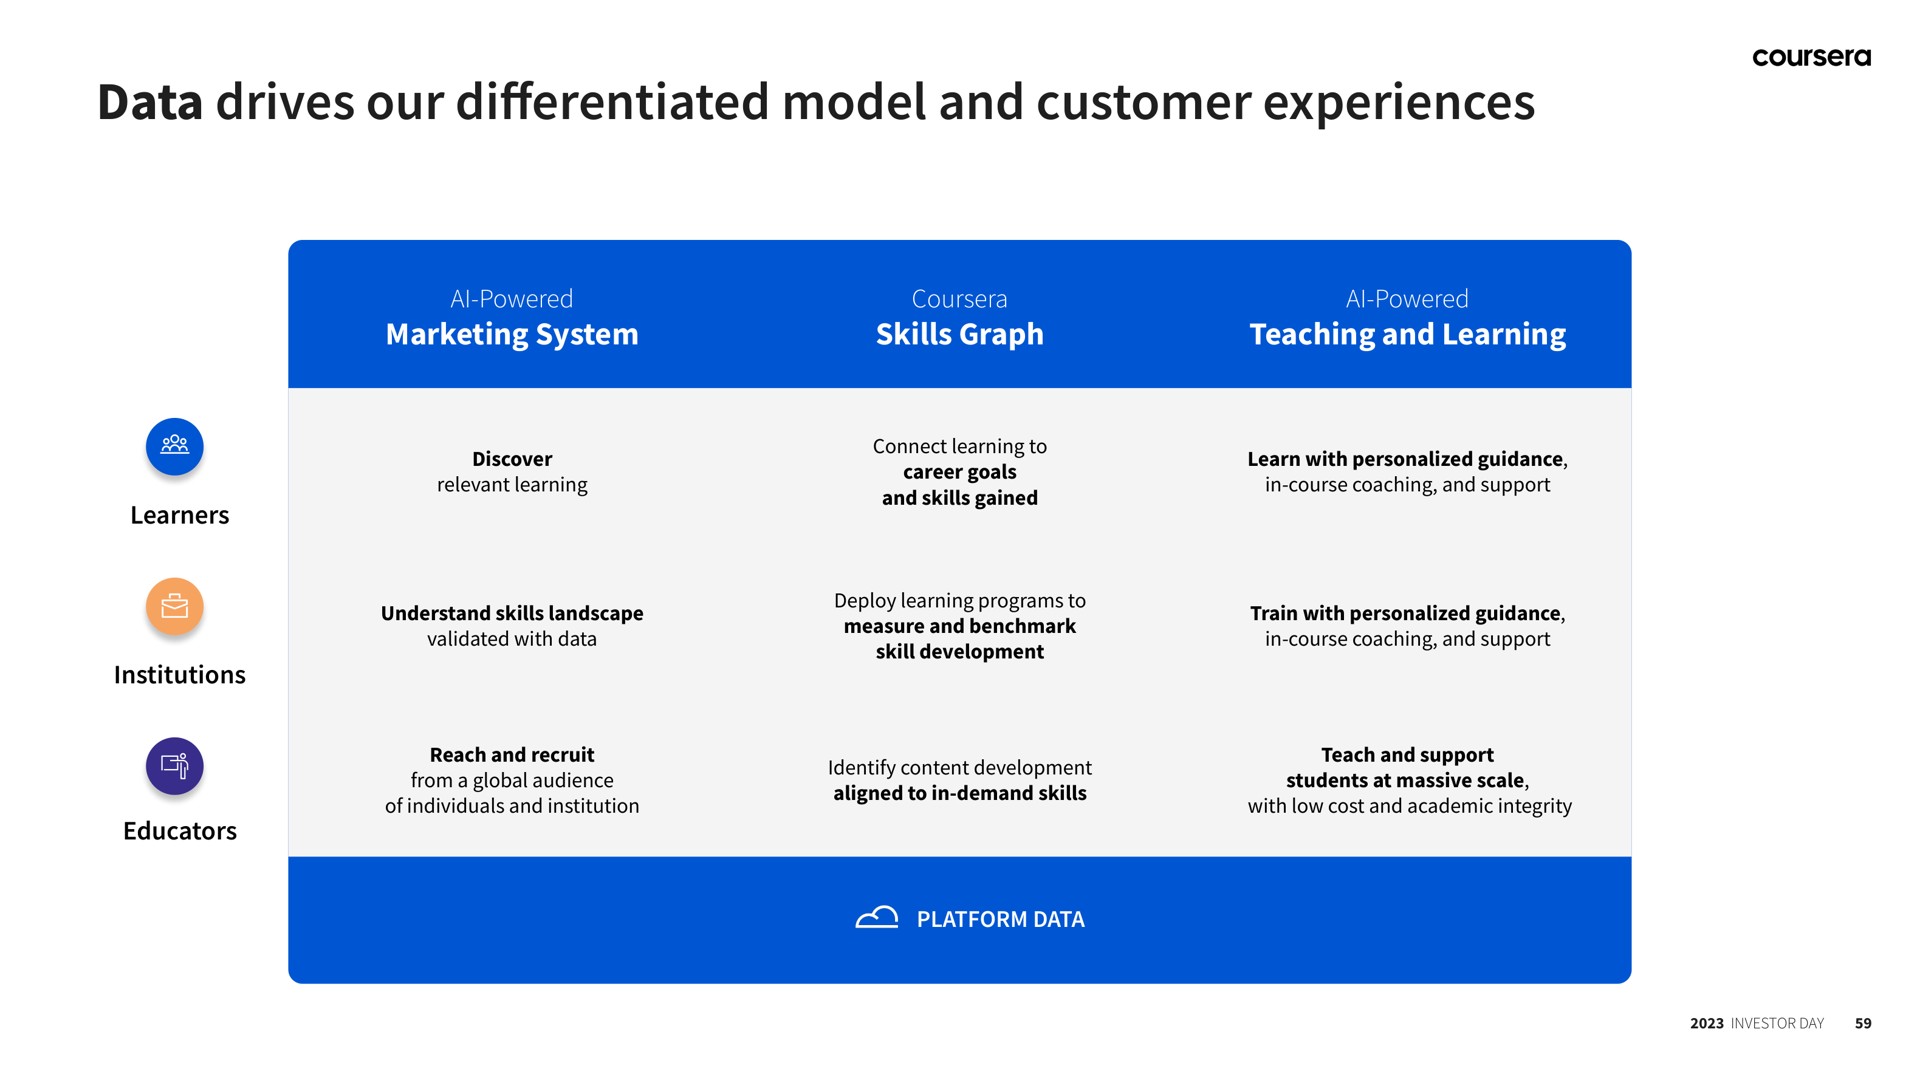 data drives our model and customer experiences differentiated | Coursera